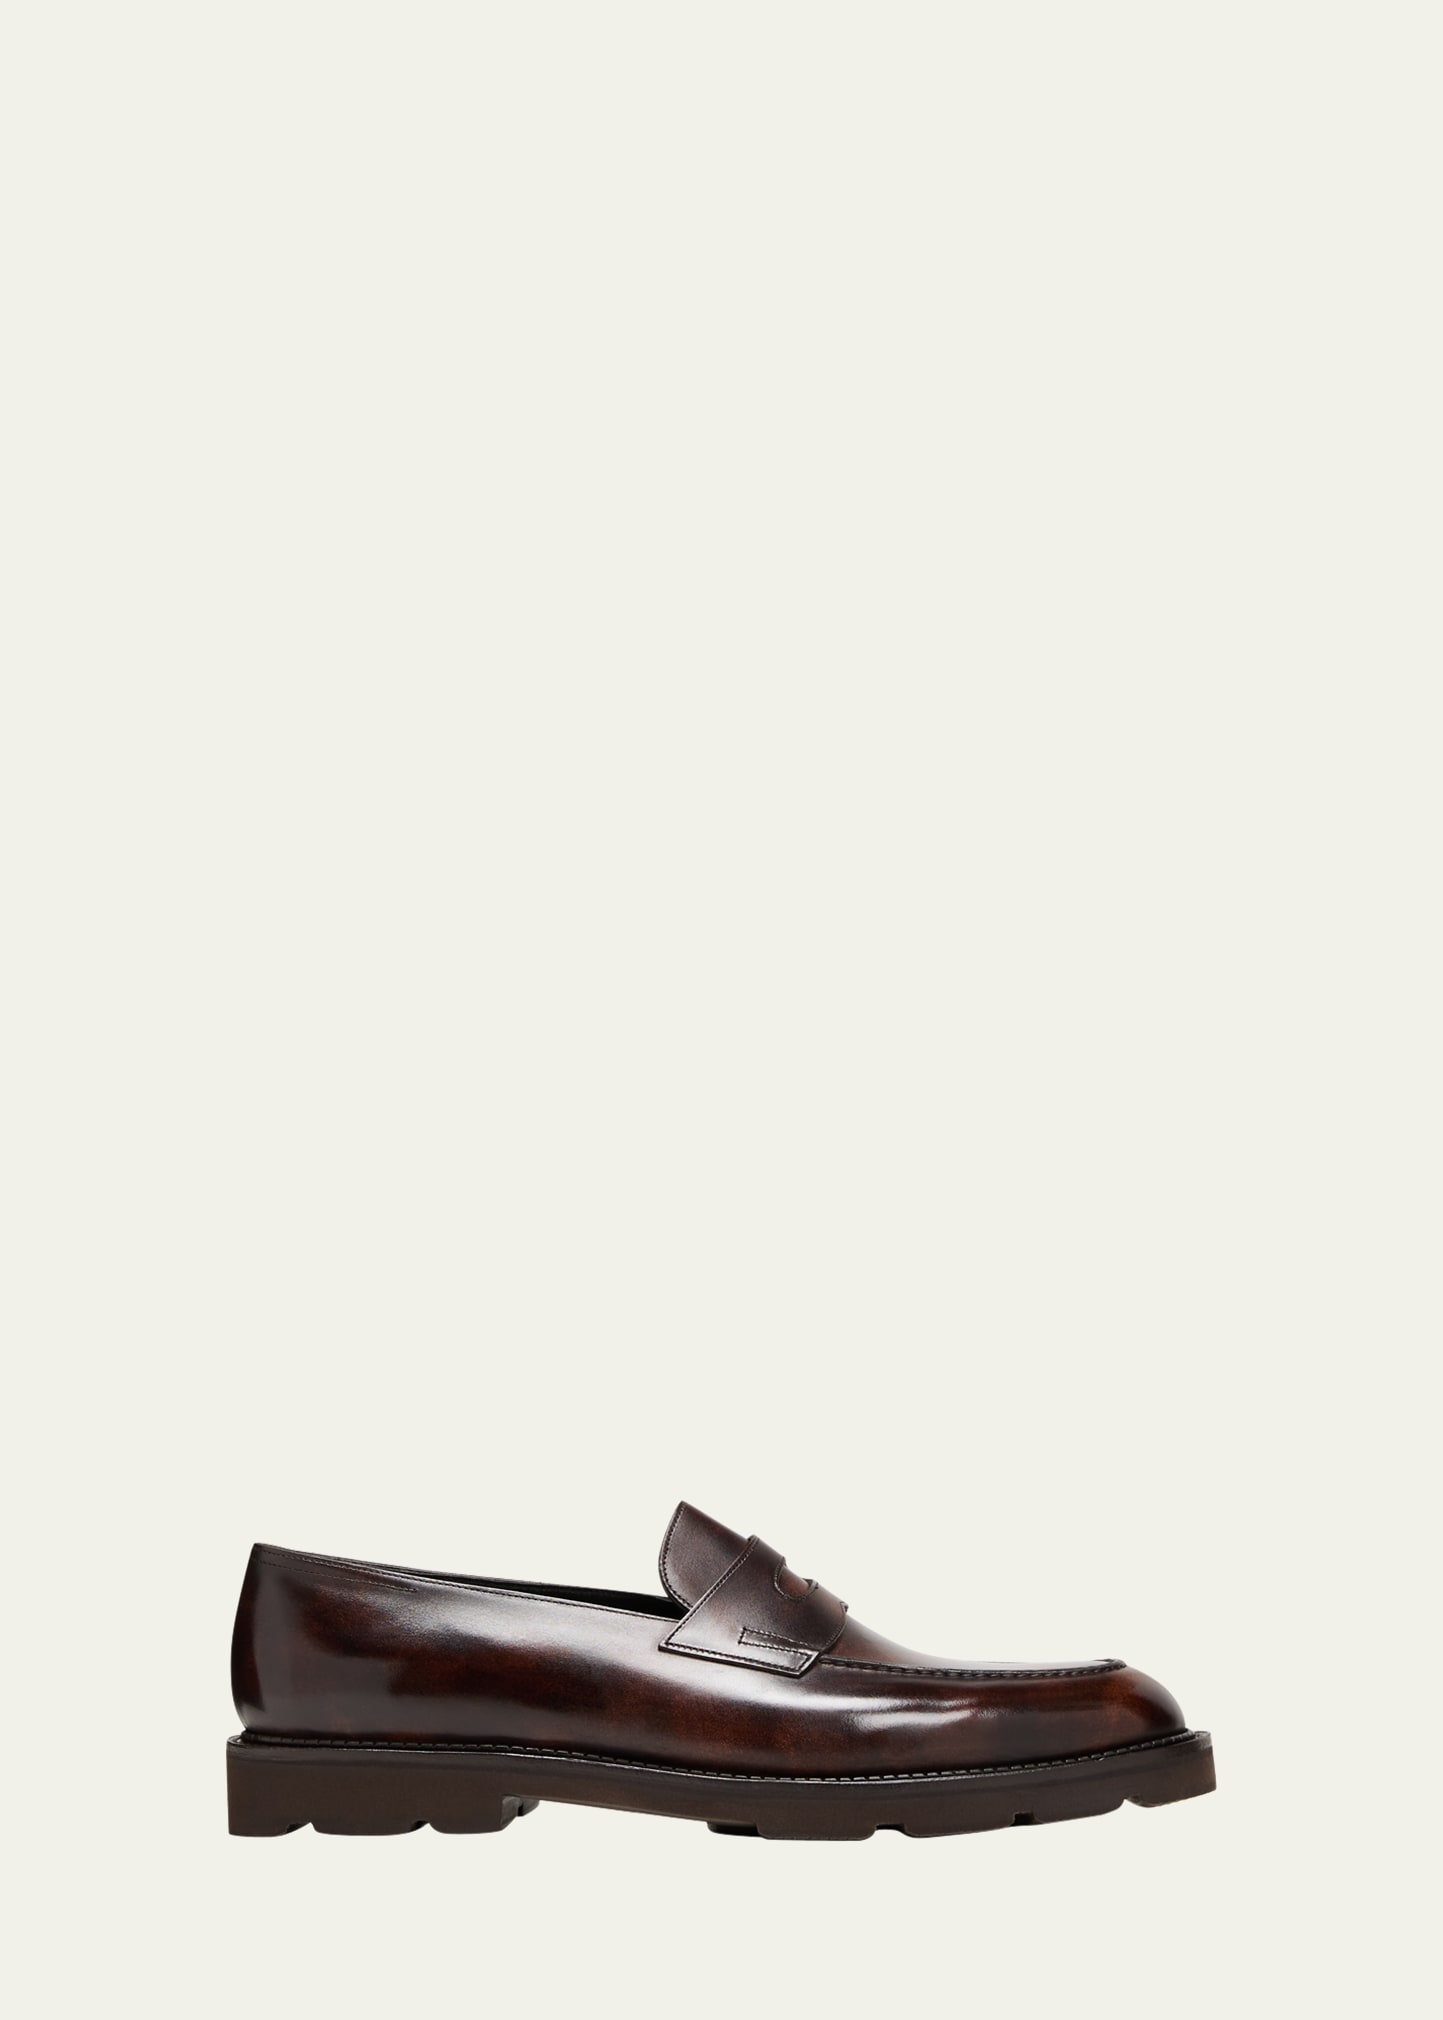 Men's Lopez Apron-Toe Leather Penny Loafers